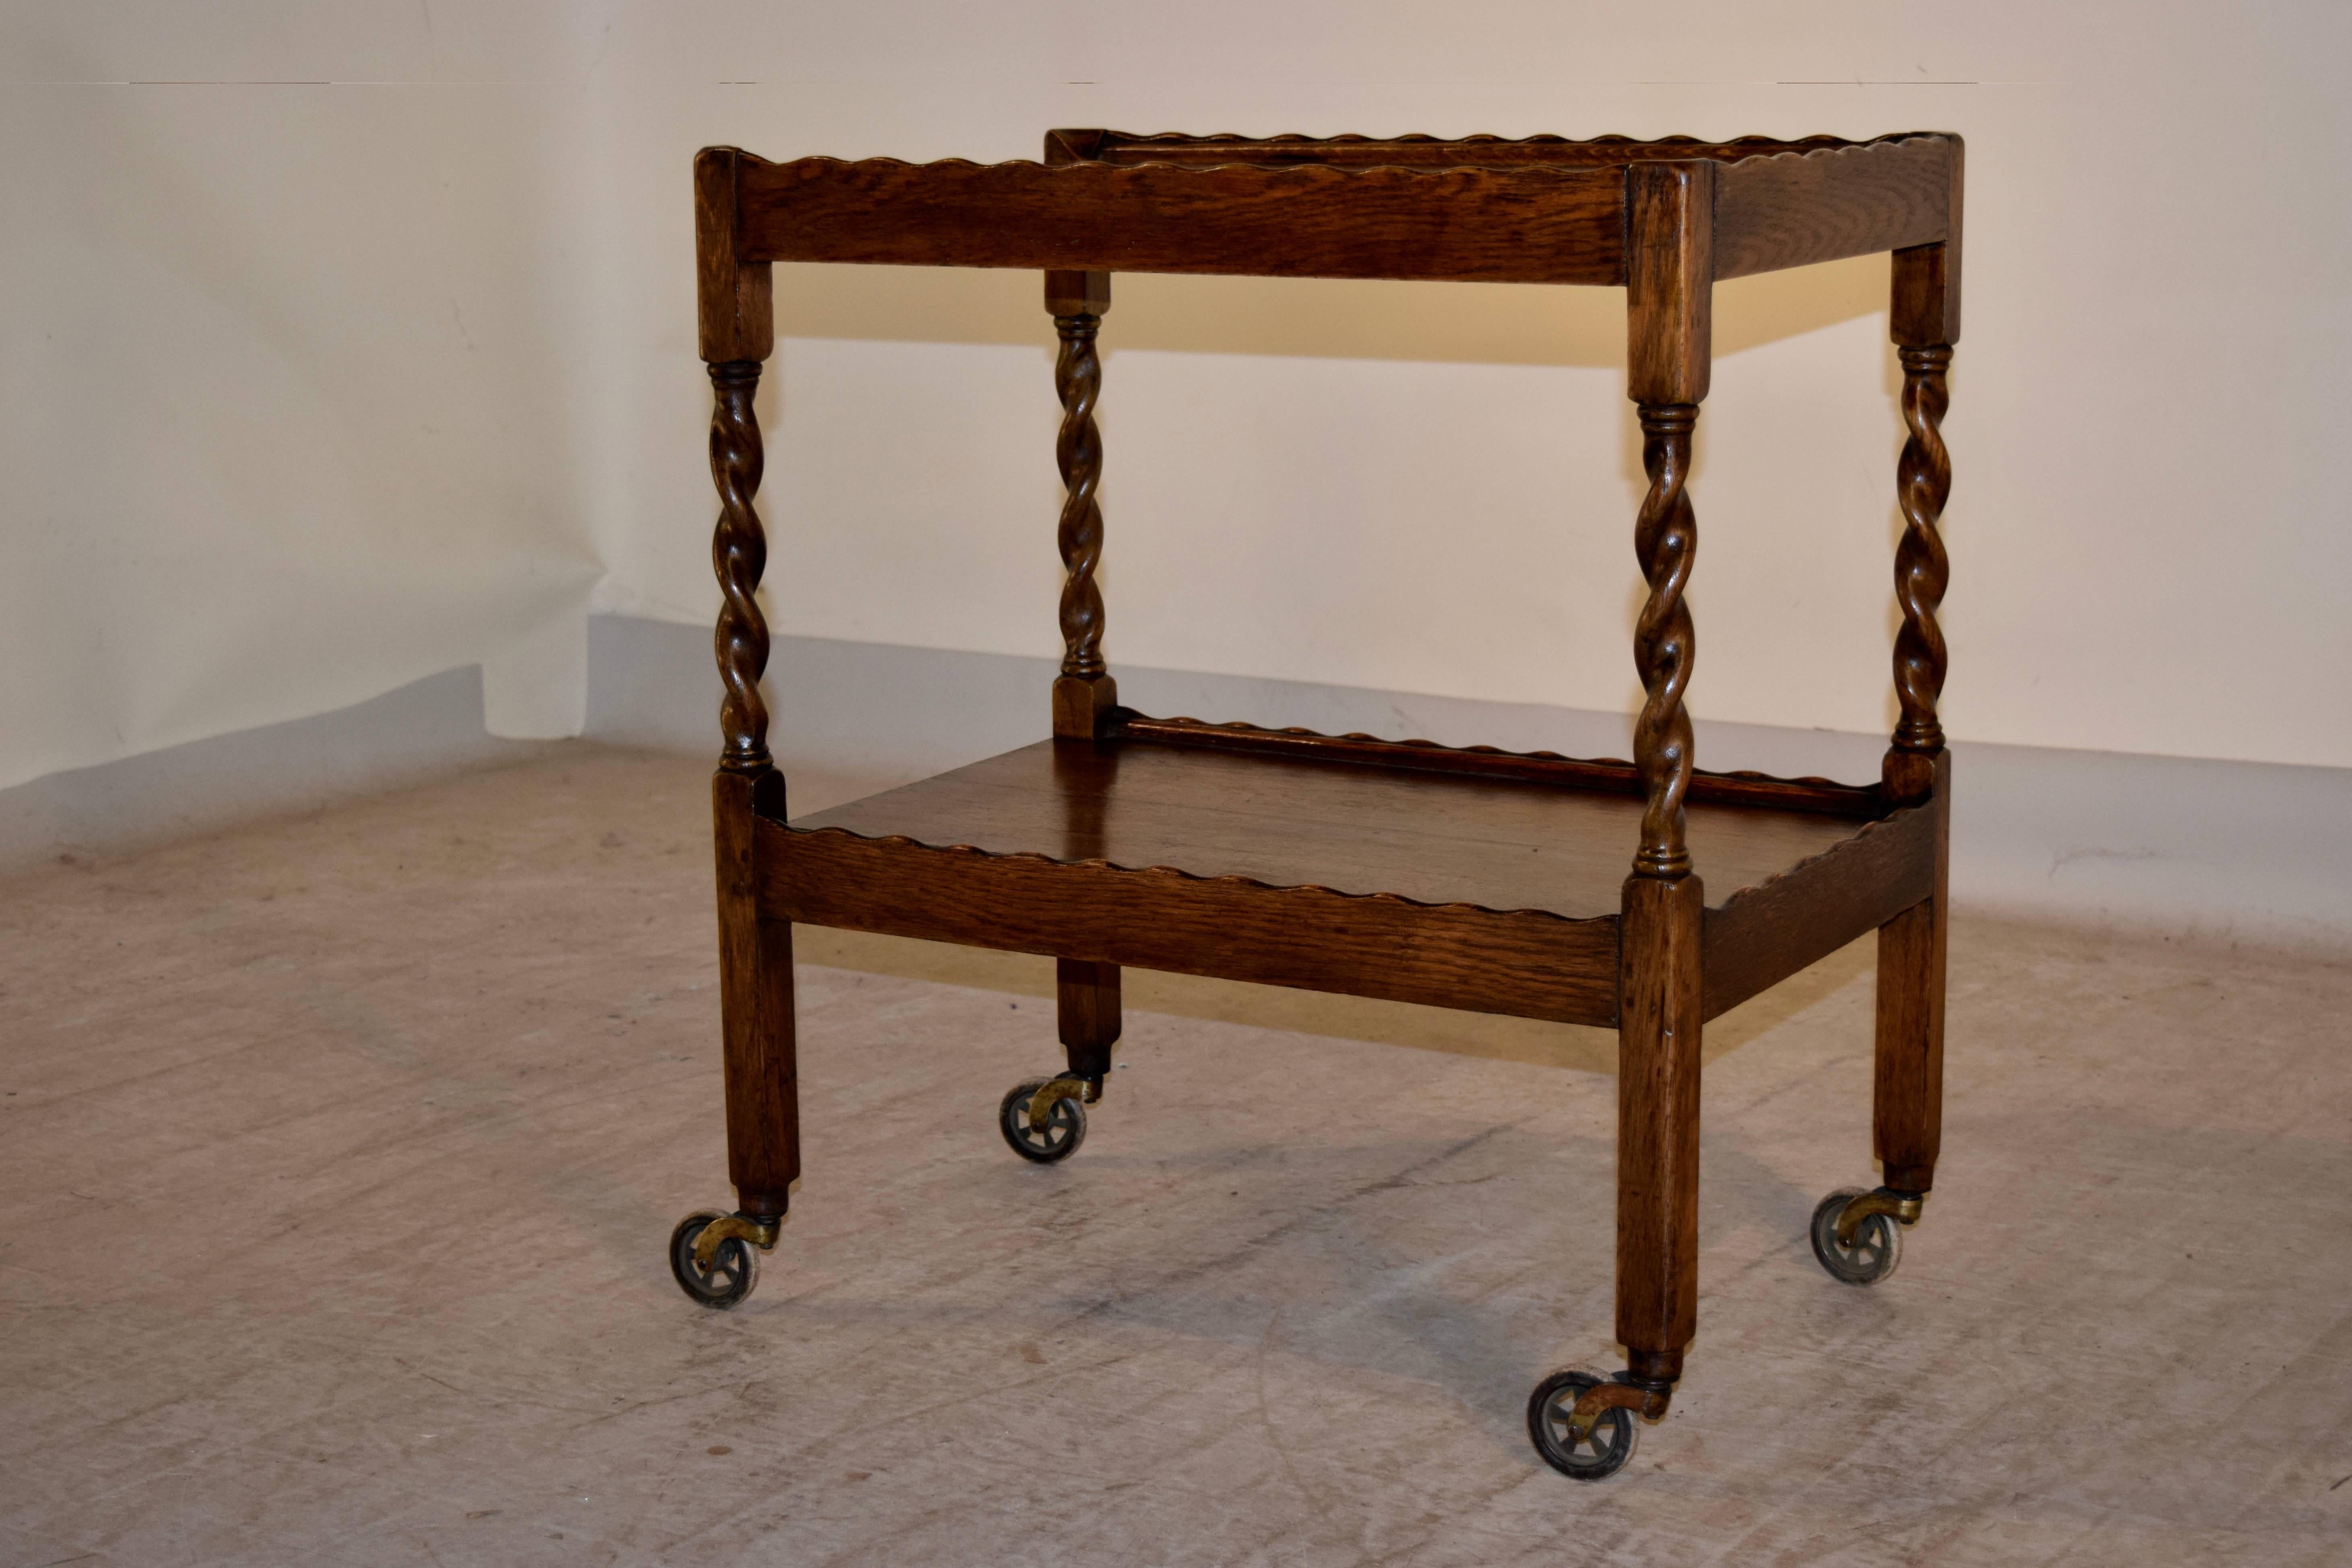 English oak drinks cart with scalloped galleries around the top and lower shelves, which are connected by barley twist legs, circa 1900. Supported on casters.